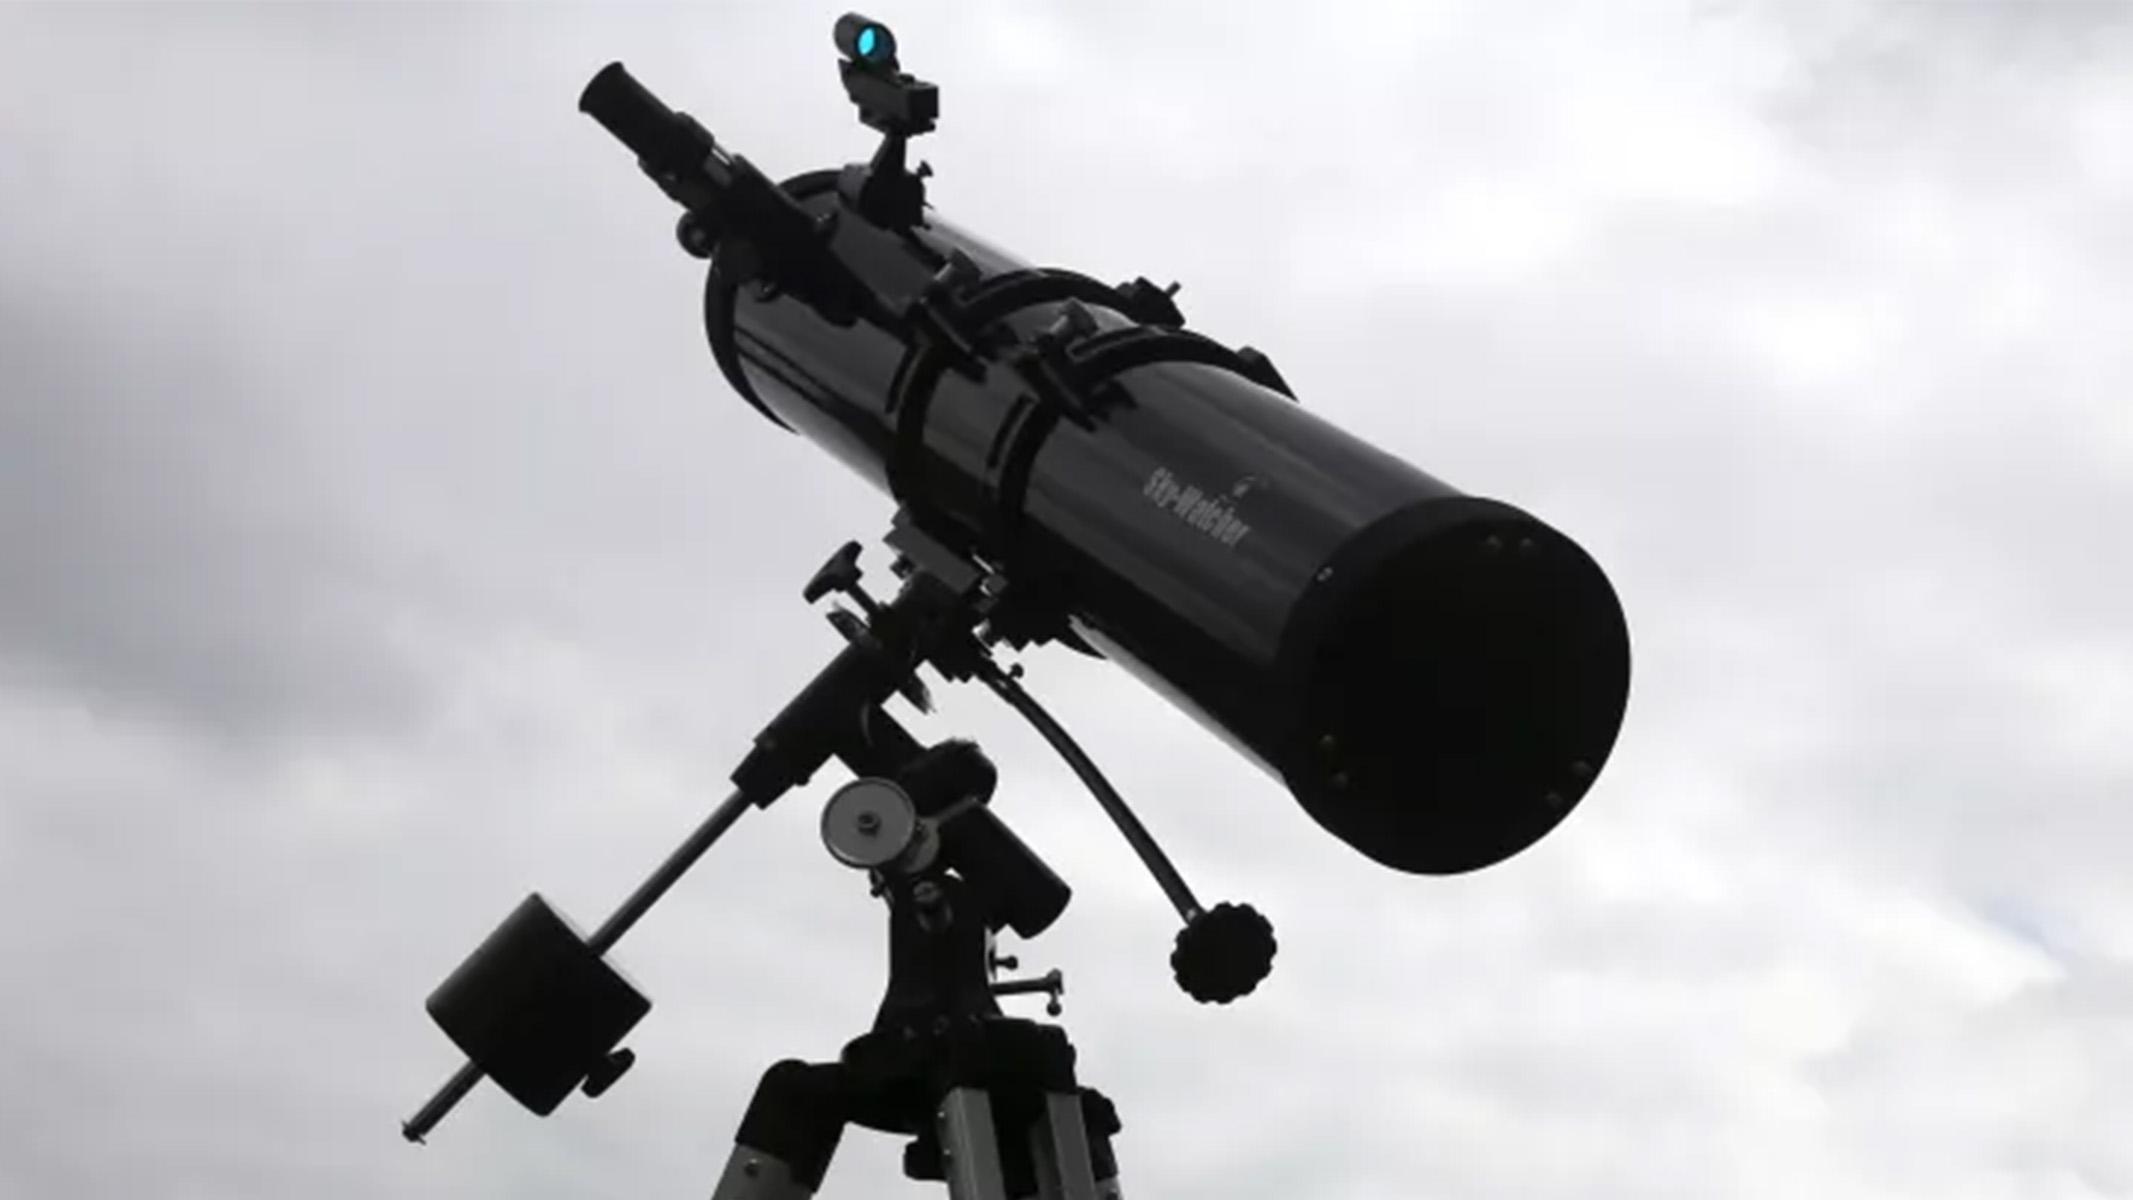 The Sky-Watcher Explorer 130 EQ2 telescope outside with a backdrop of clouds